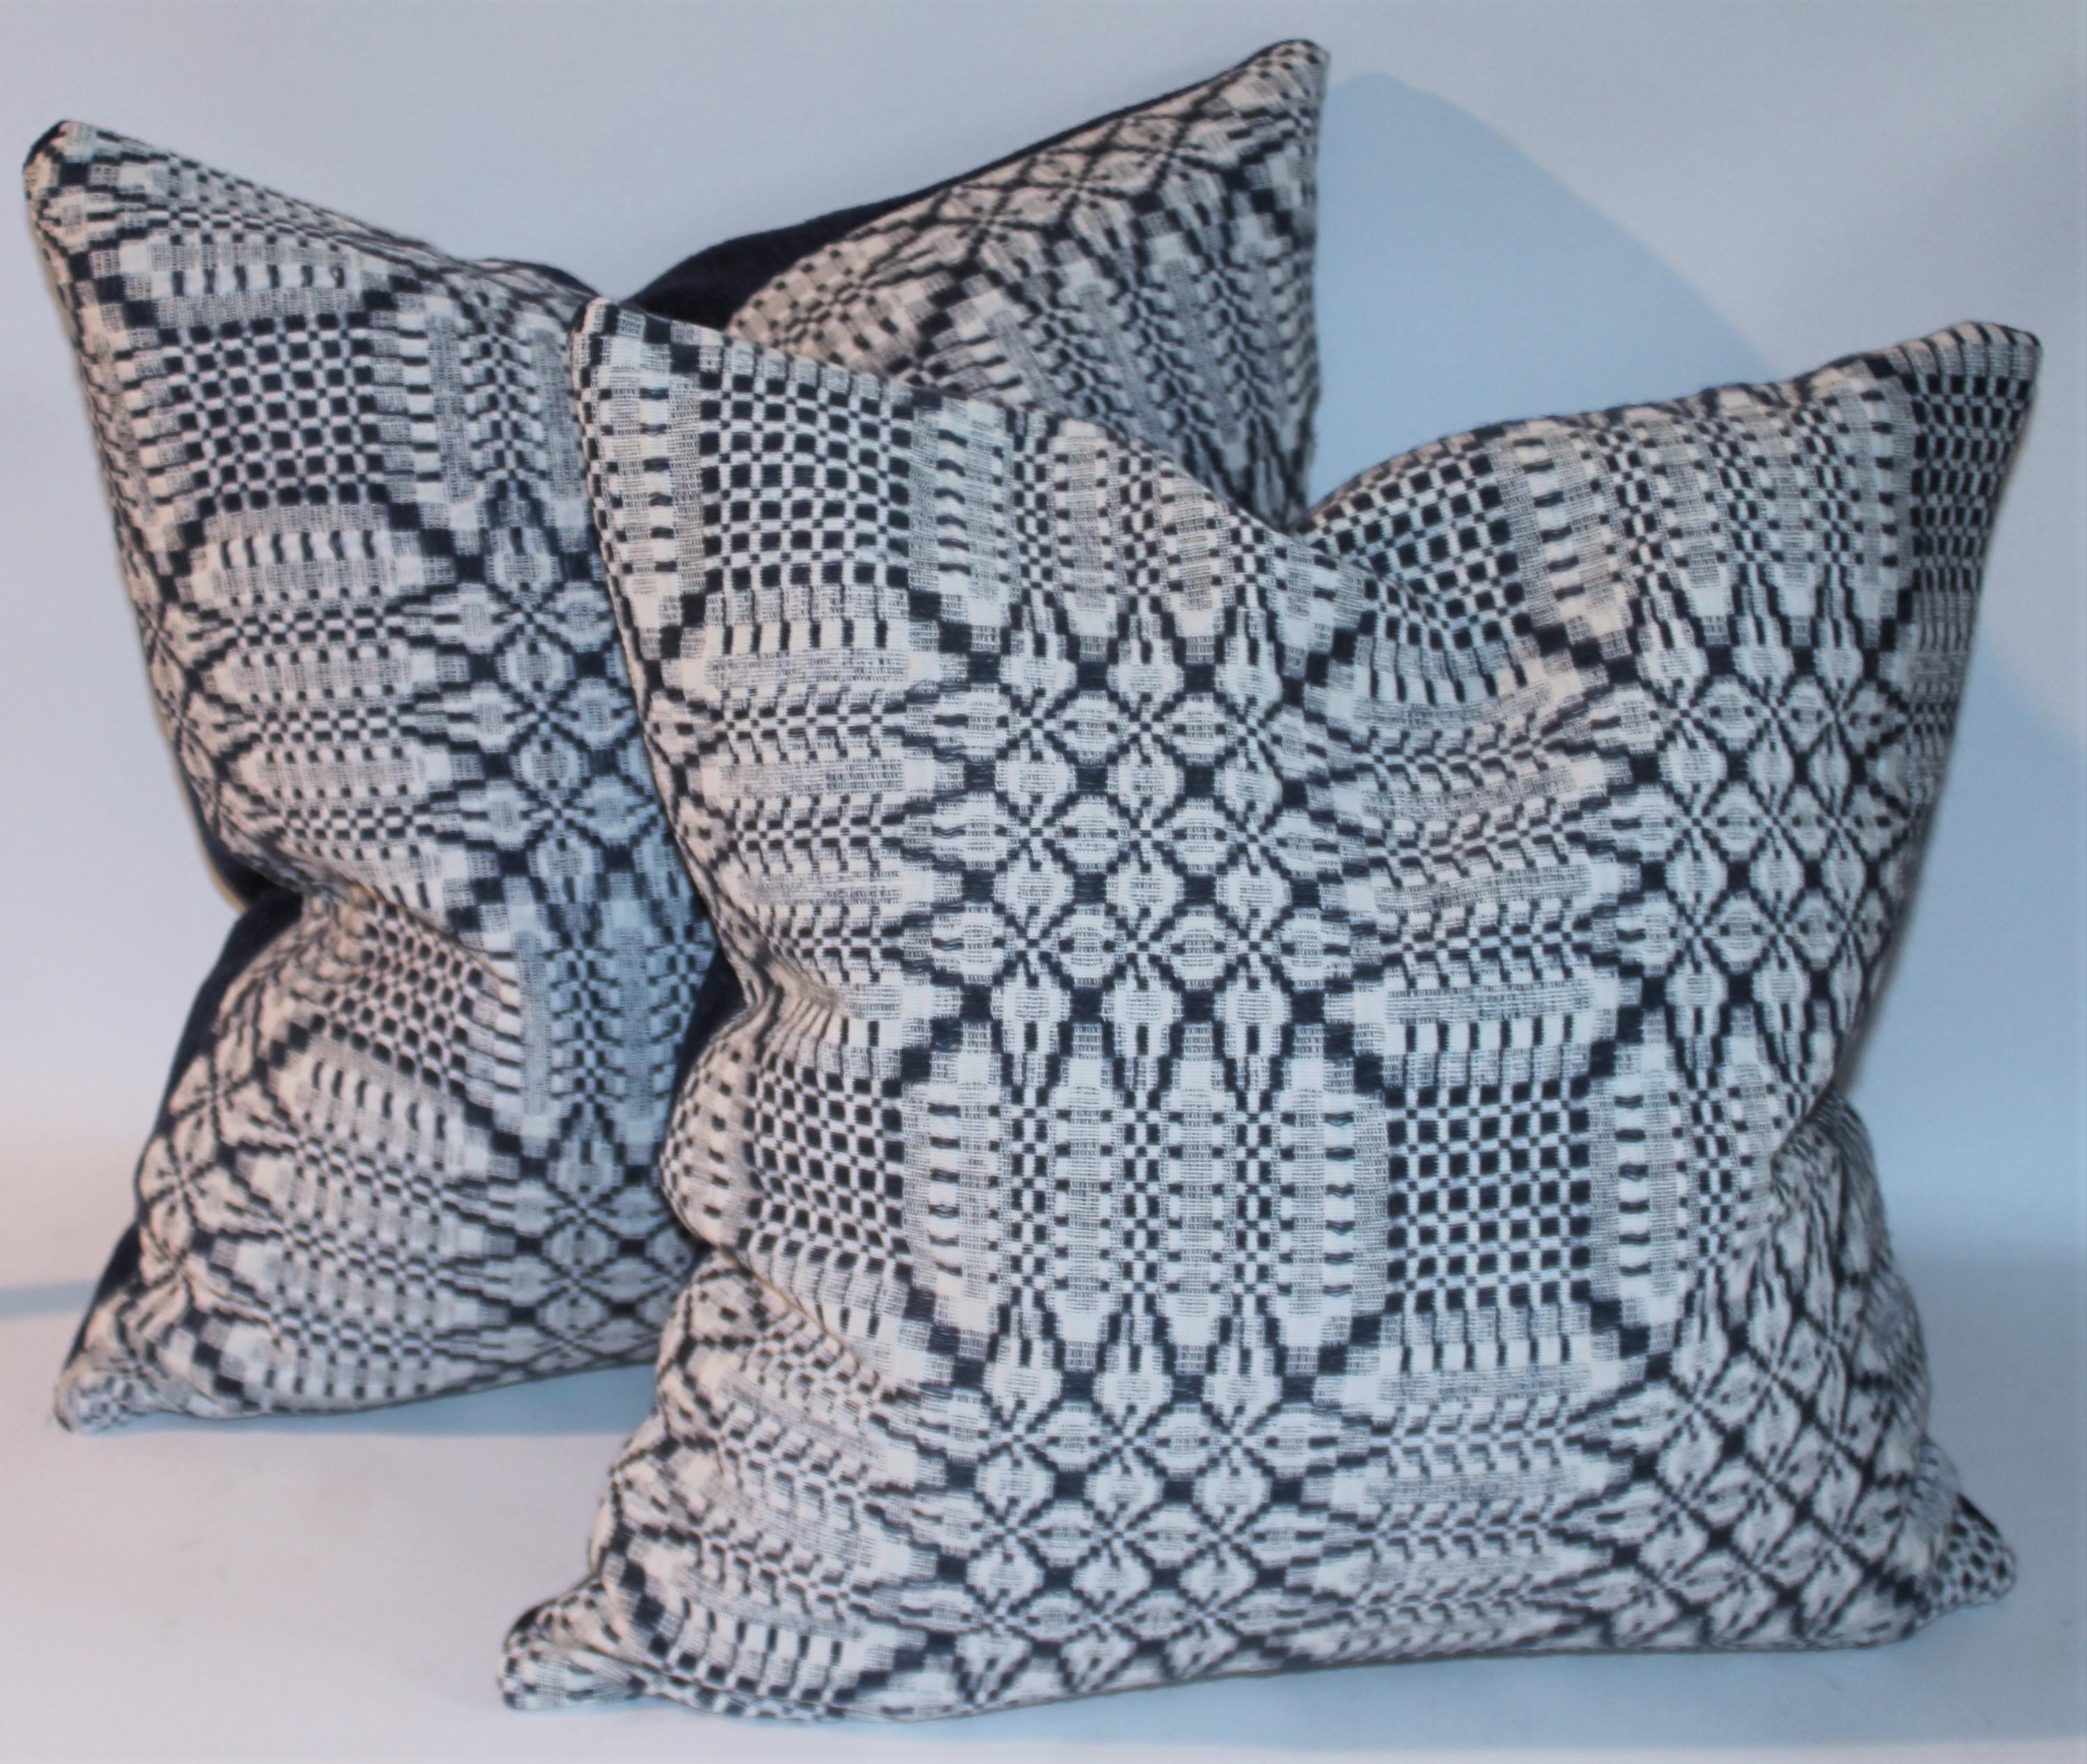 These hand woven 19thc coverlet pillows have a cream cotton linen backings. This collection of four , two pairs of 18 x 18 pillows have zippers for cleaning removal. The inserts are down & feather fill.